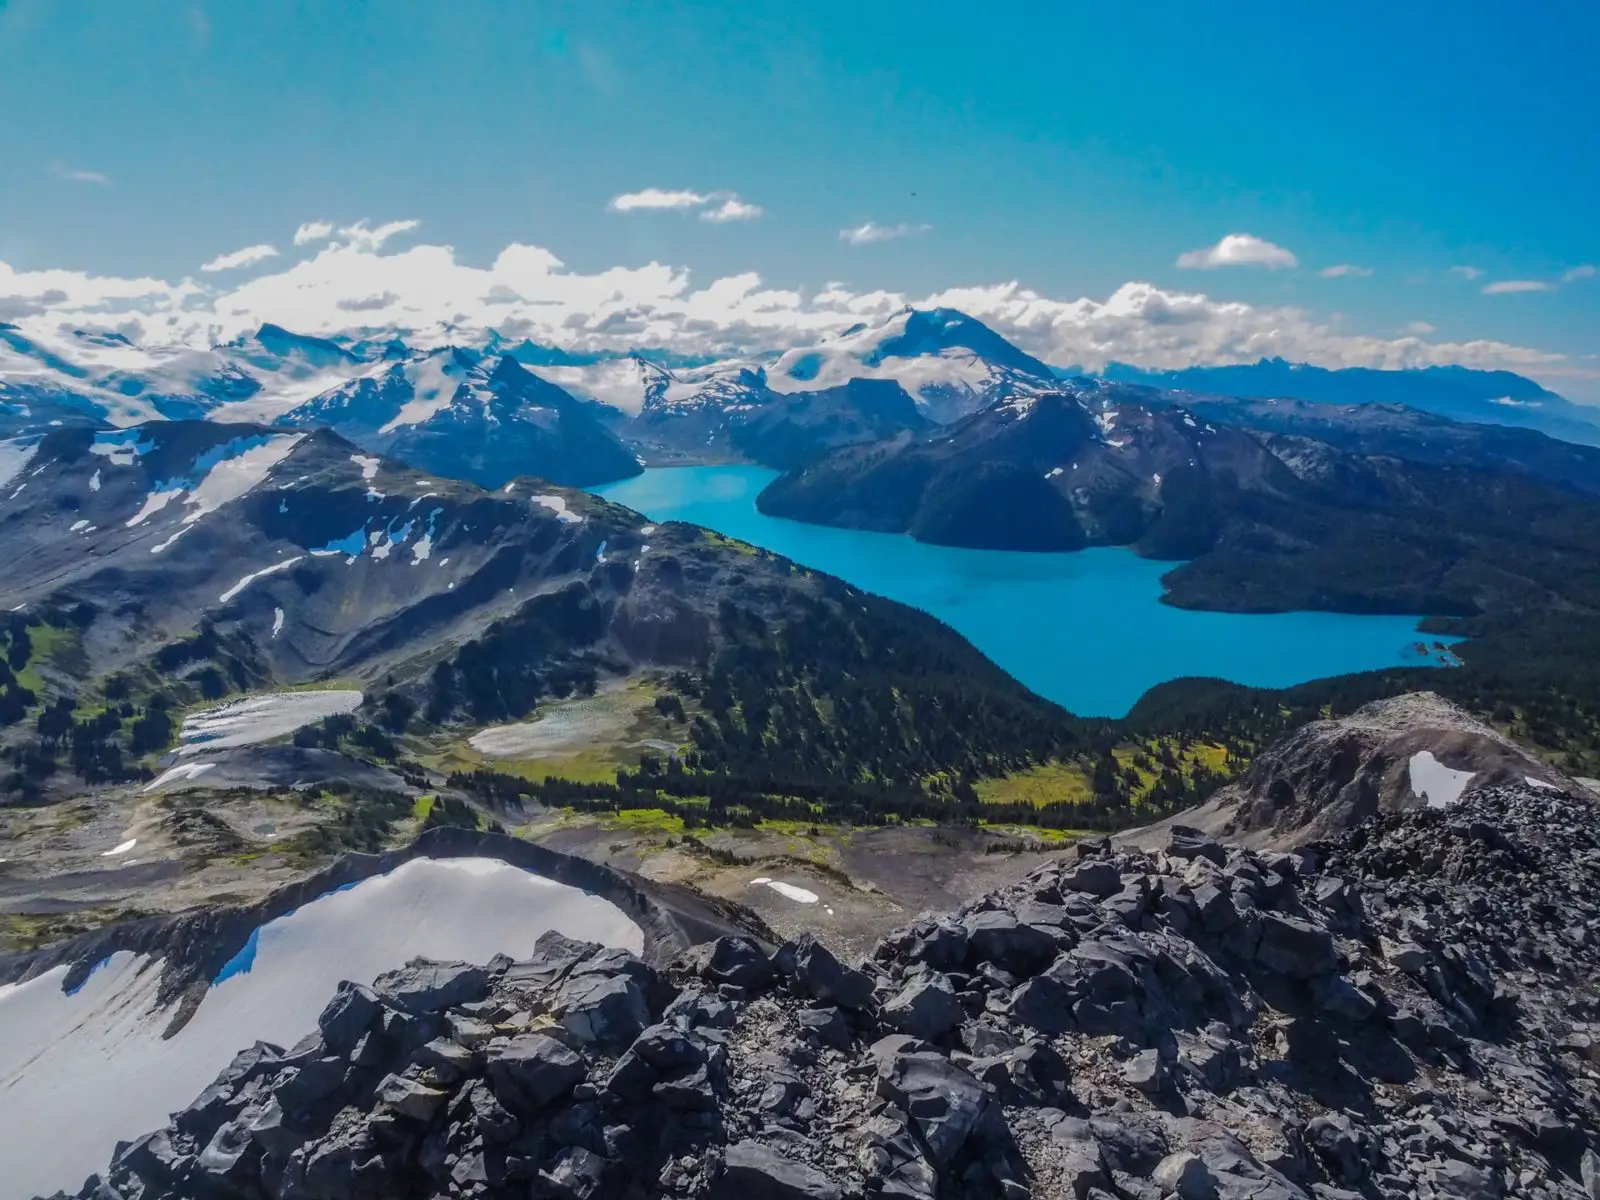 A view of Garibaldi Lake from the mountains